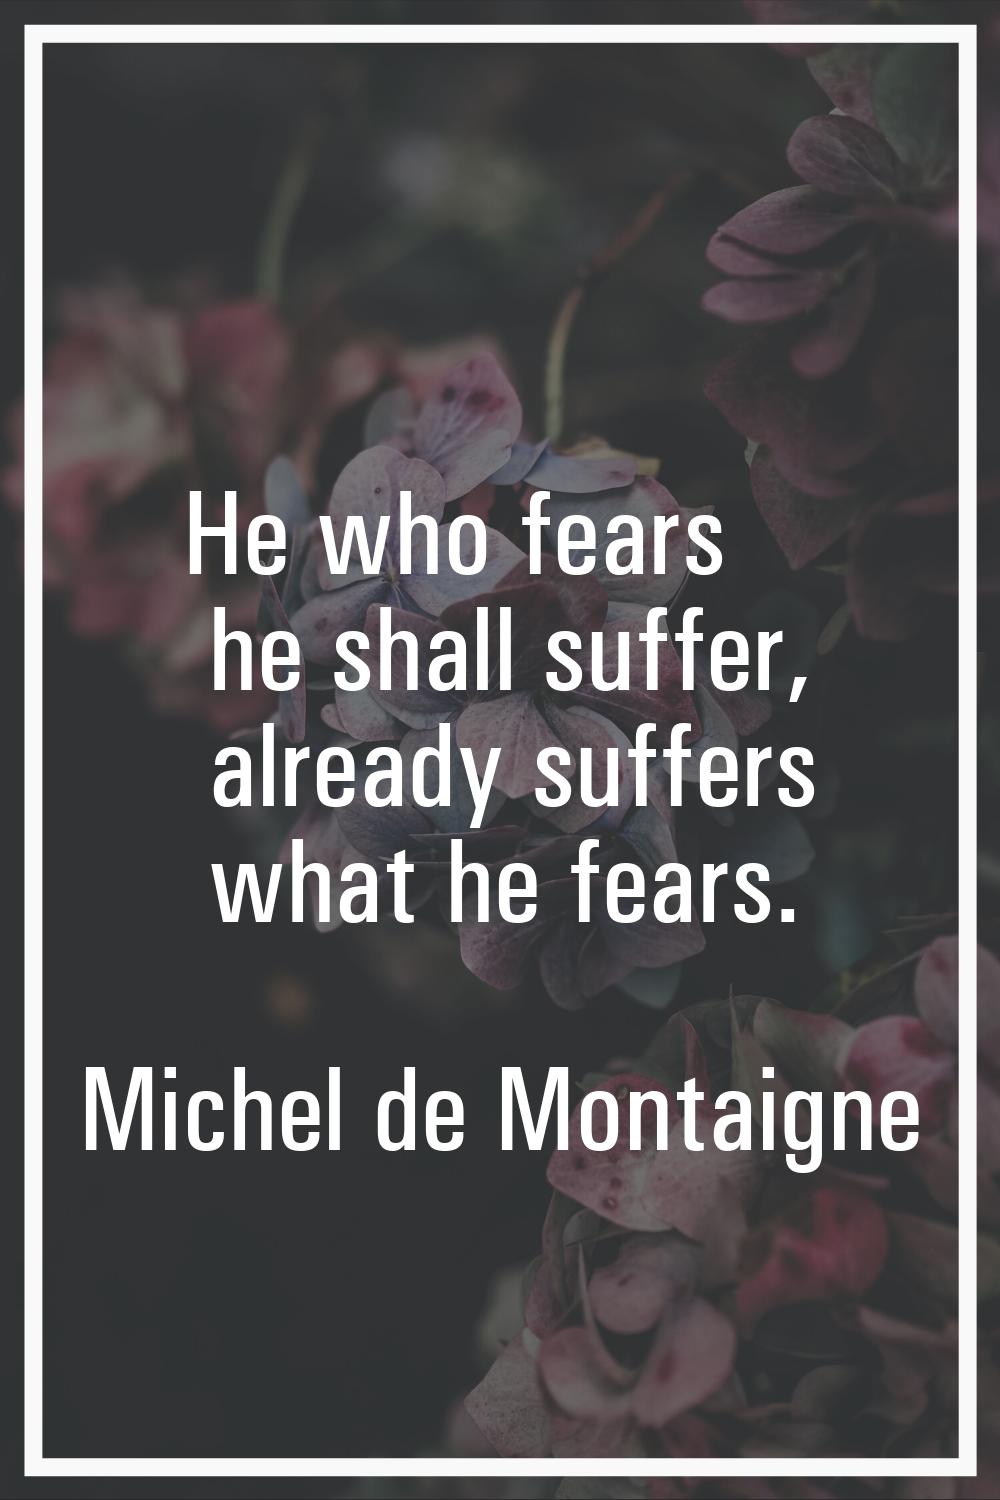 He who fears he shall suffer, already suffers what he fears.